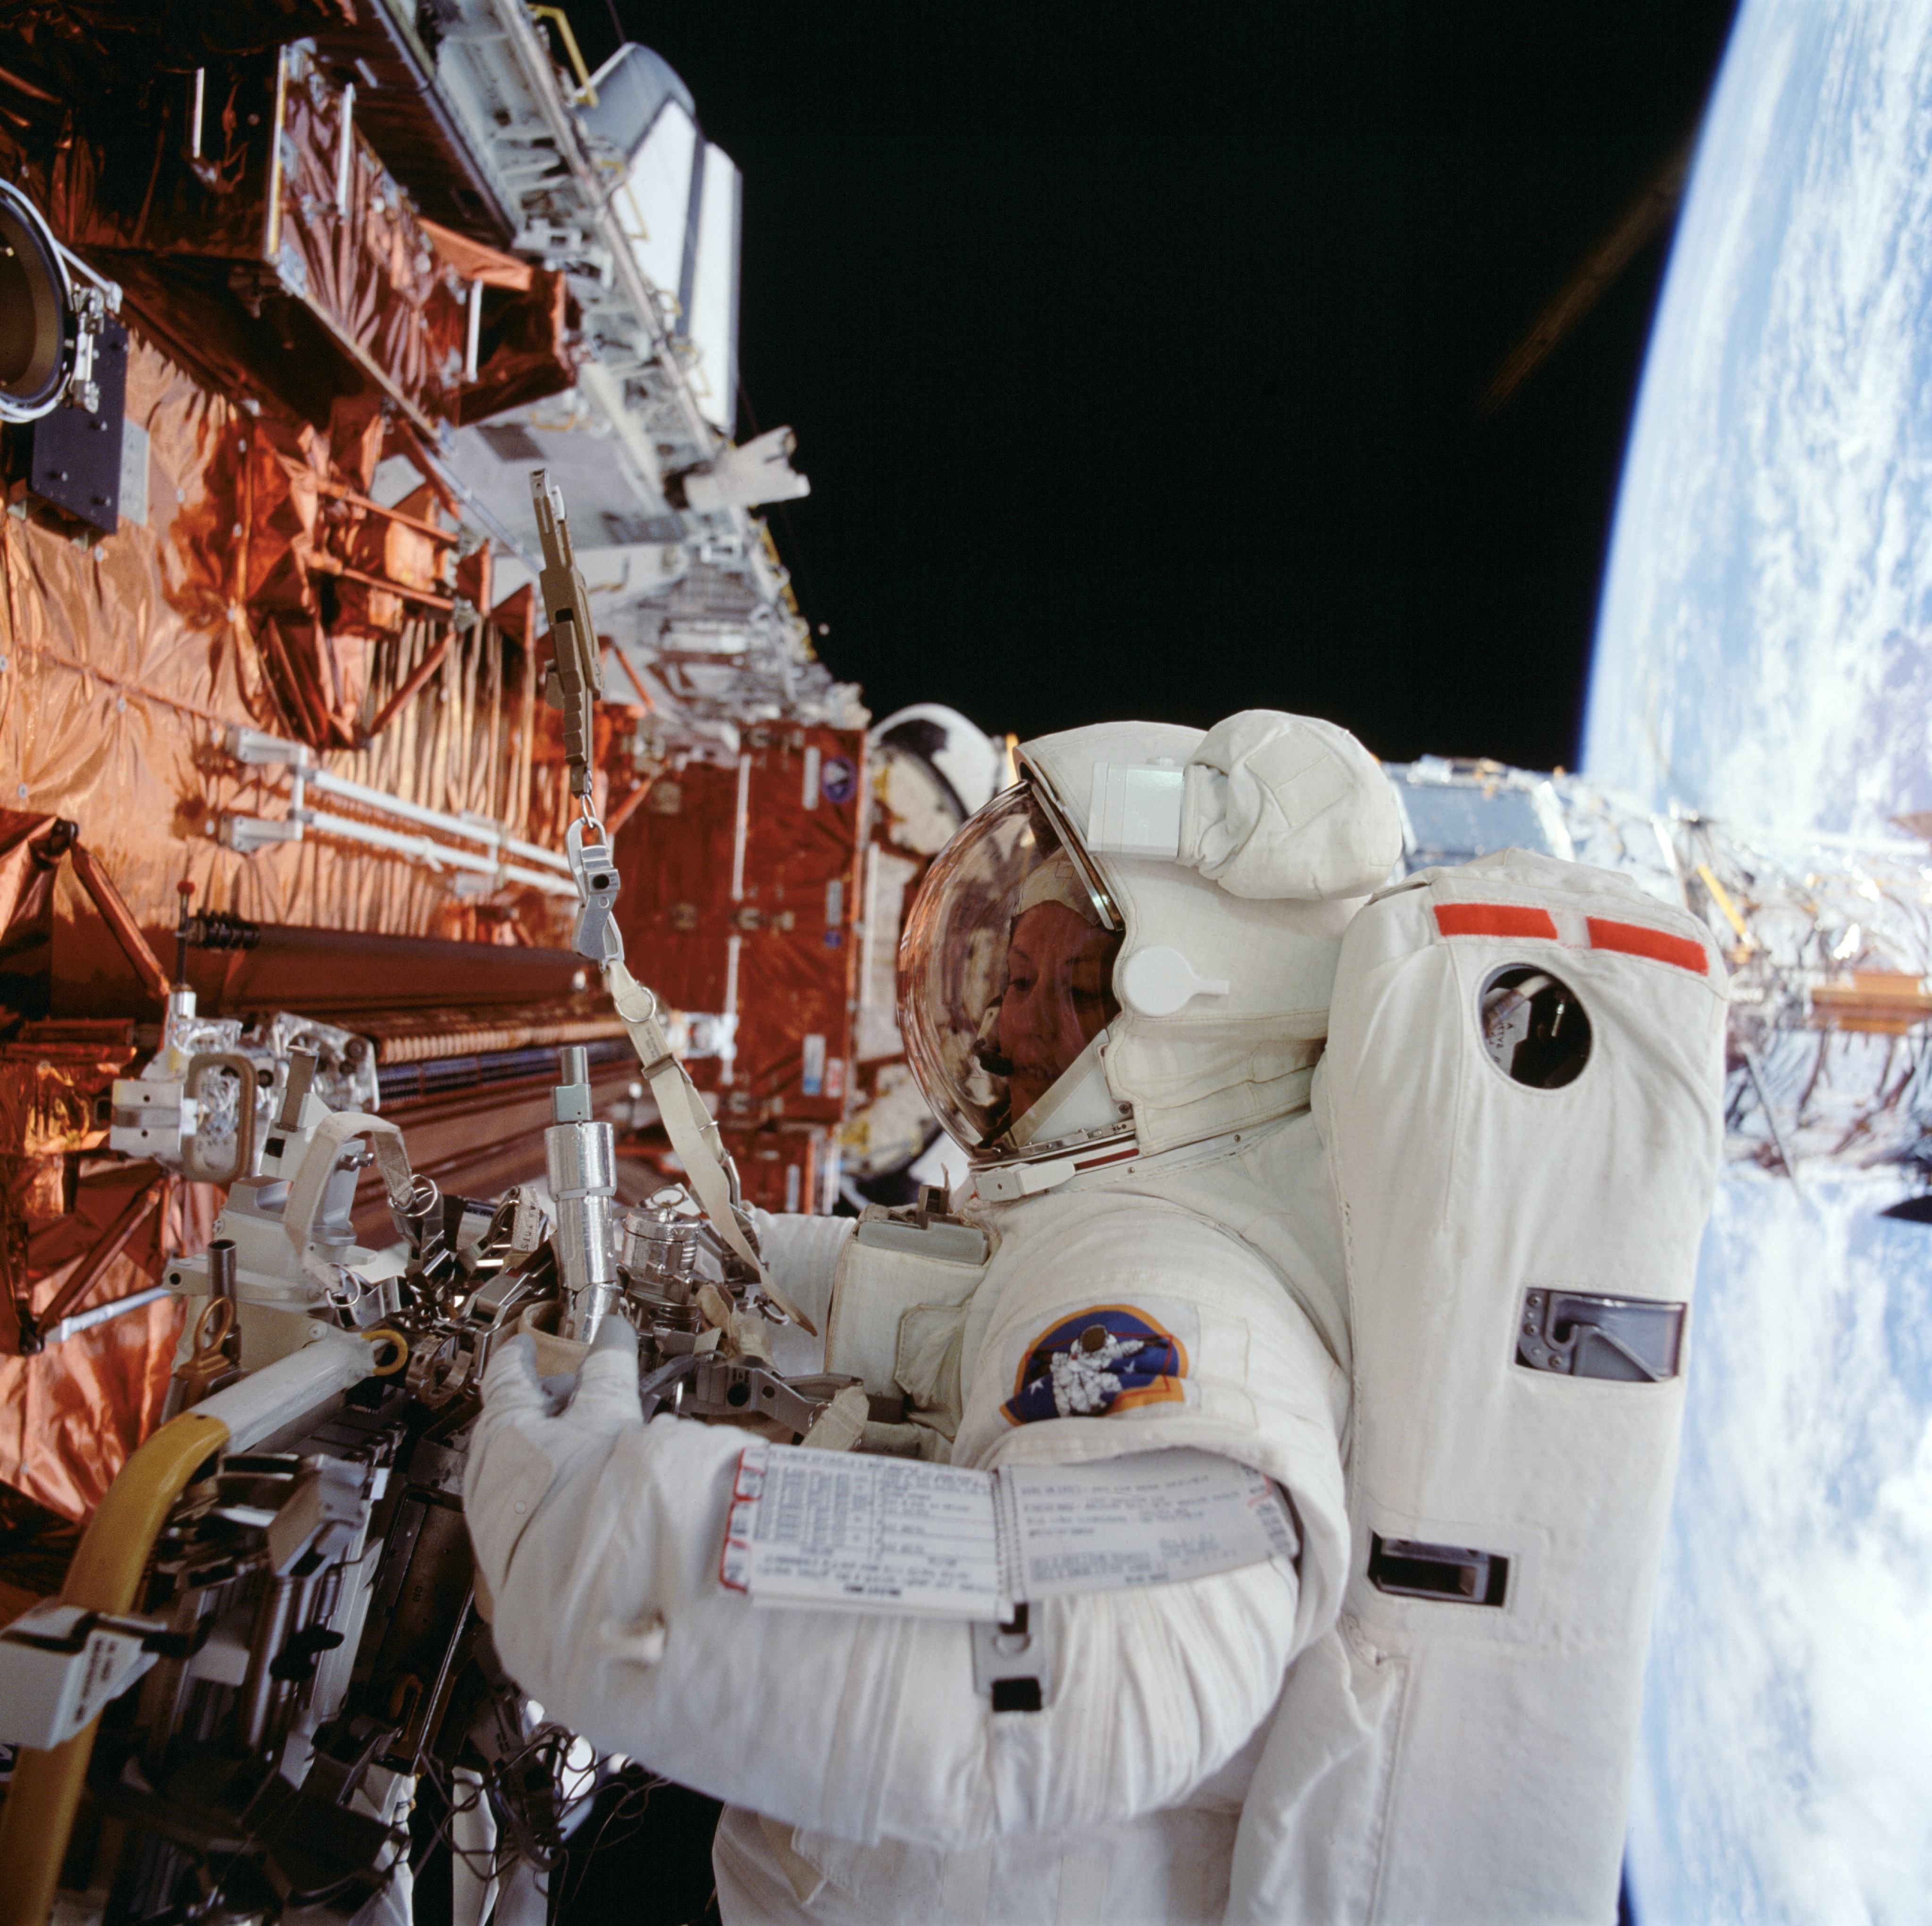 Astronaut Kathryn Thornton works with instruments while on a spacewalk. A small part of Earth is visible behind her on the right.)